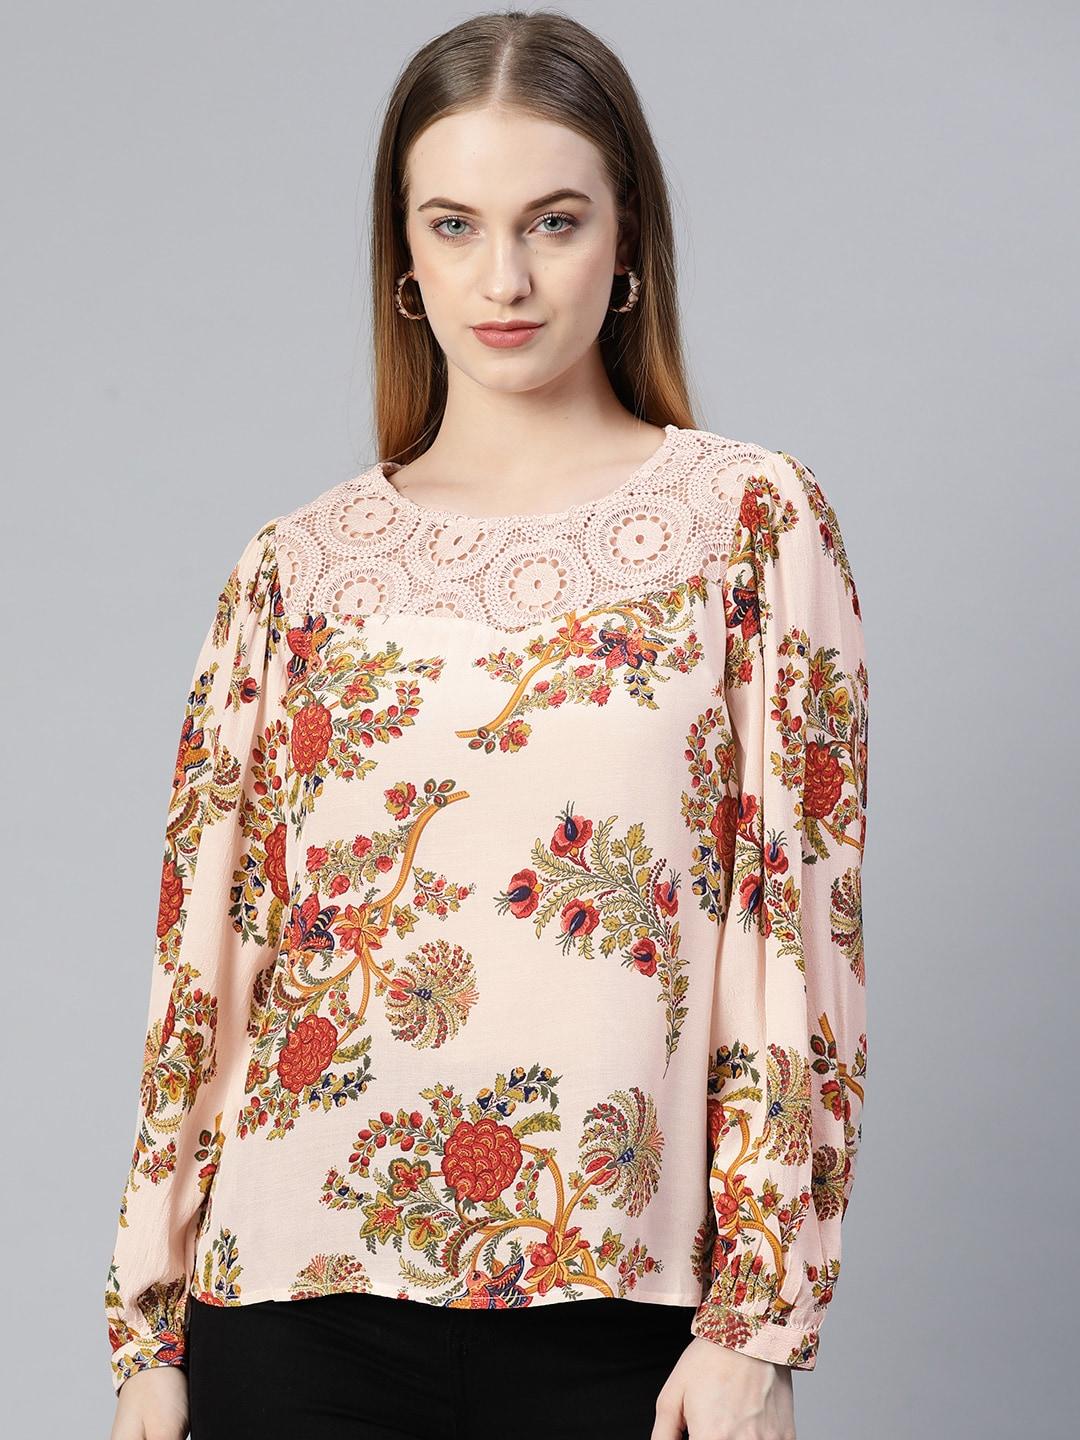 marks & spencer cream-coloured & red floral print lace detail top